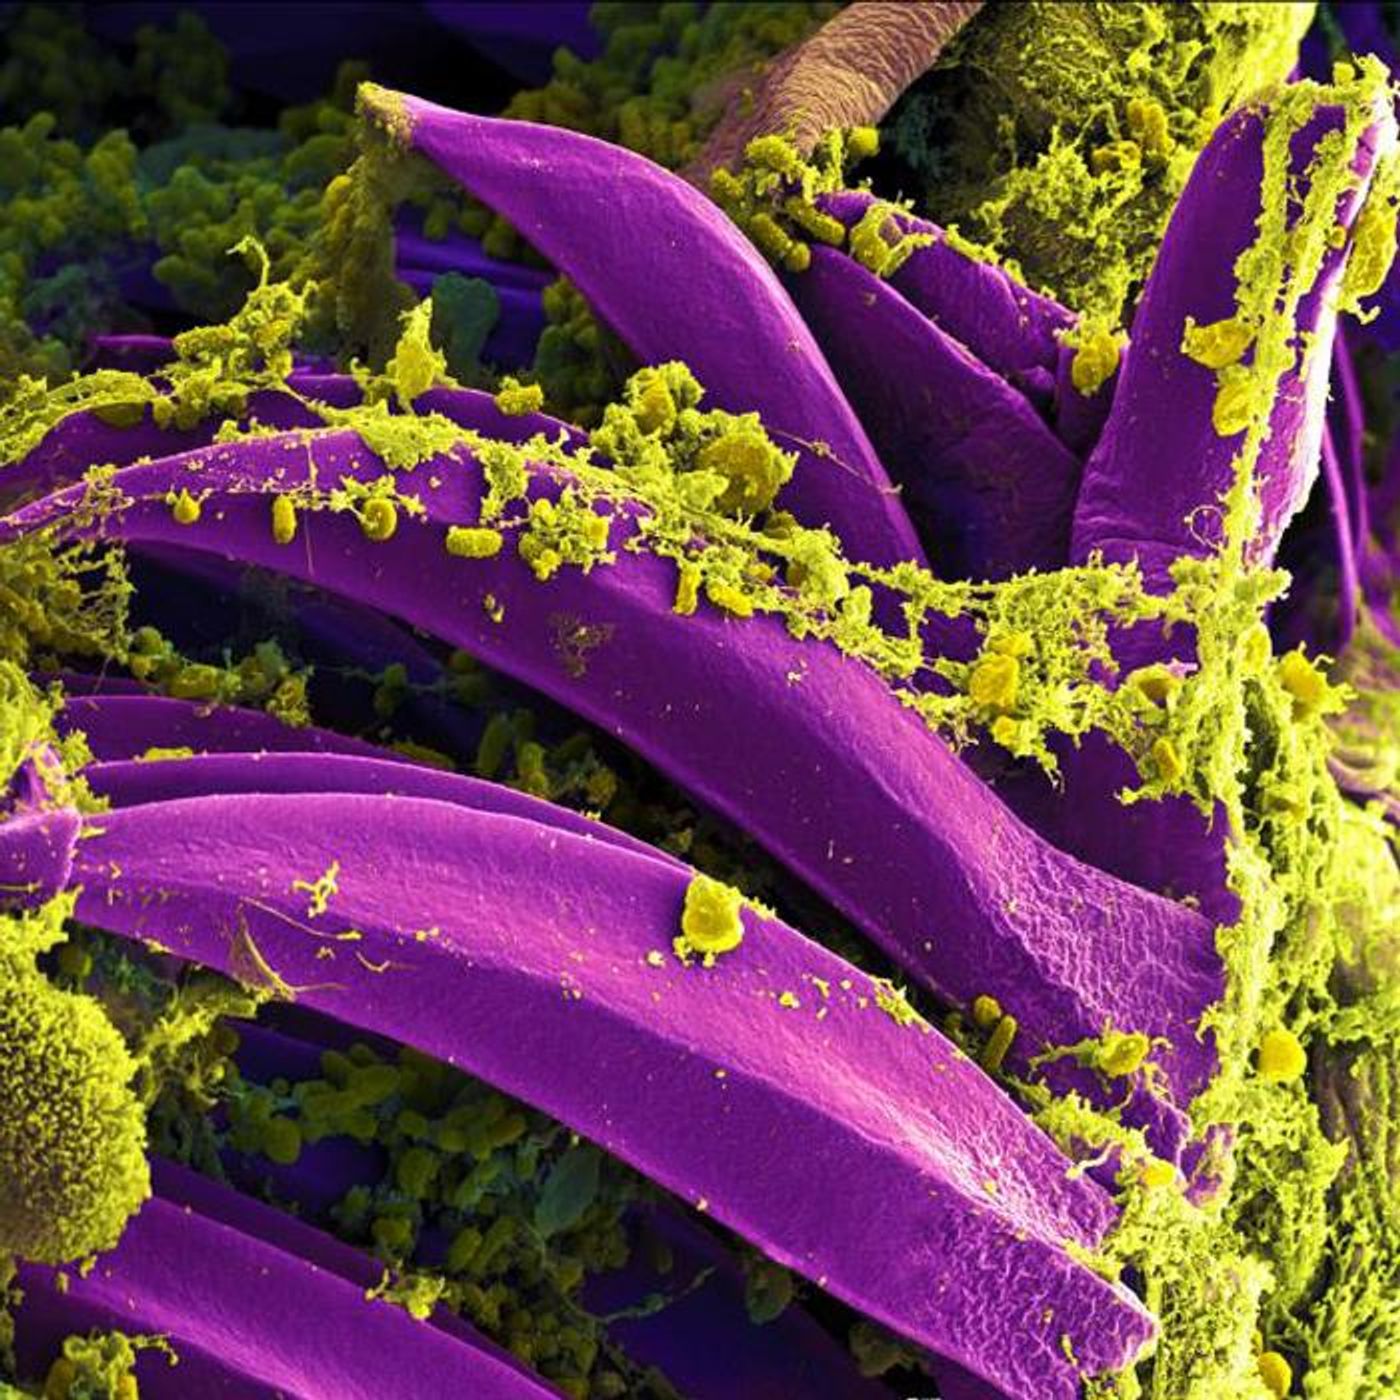 A digitally colorized SEM image of Yersinia pestis bacteria (yellow) that had gathered on the proventricular spines of a Xenopsylla cheopis flea. These spines line part of the flea's digestive system. The Y. pestis bacterium is the pathogen that causes bubonic plague. / Credit: National Institute of Allergy and Infectious Diseases (NIAID)